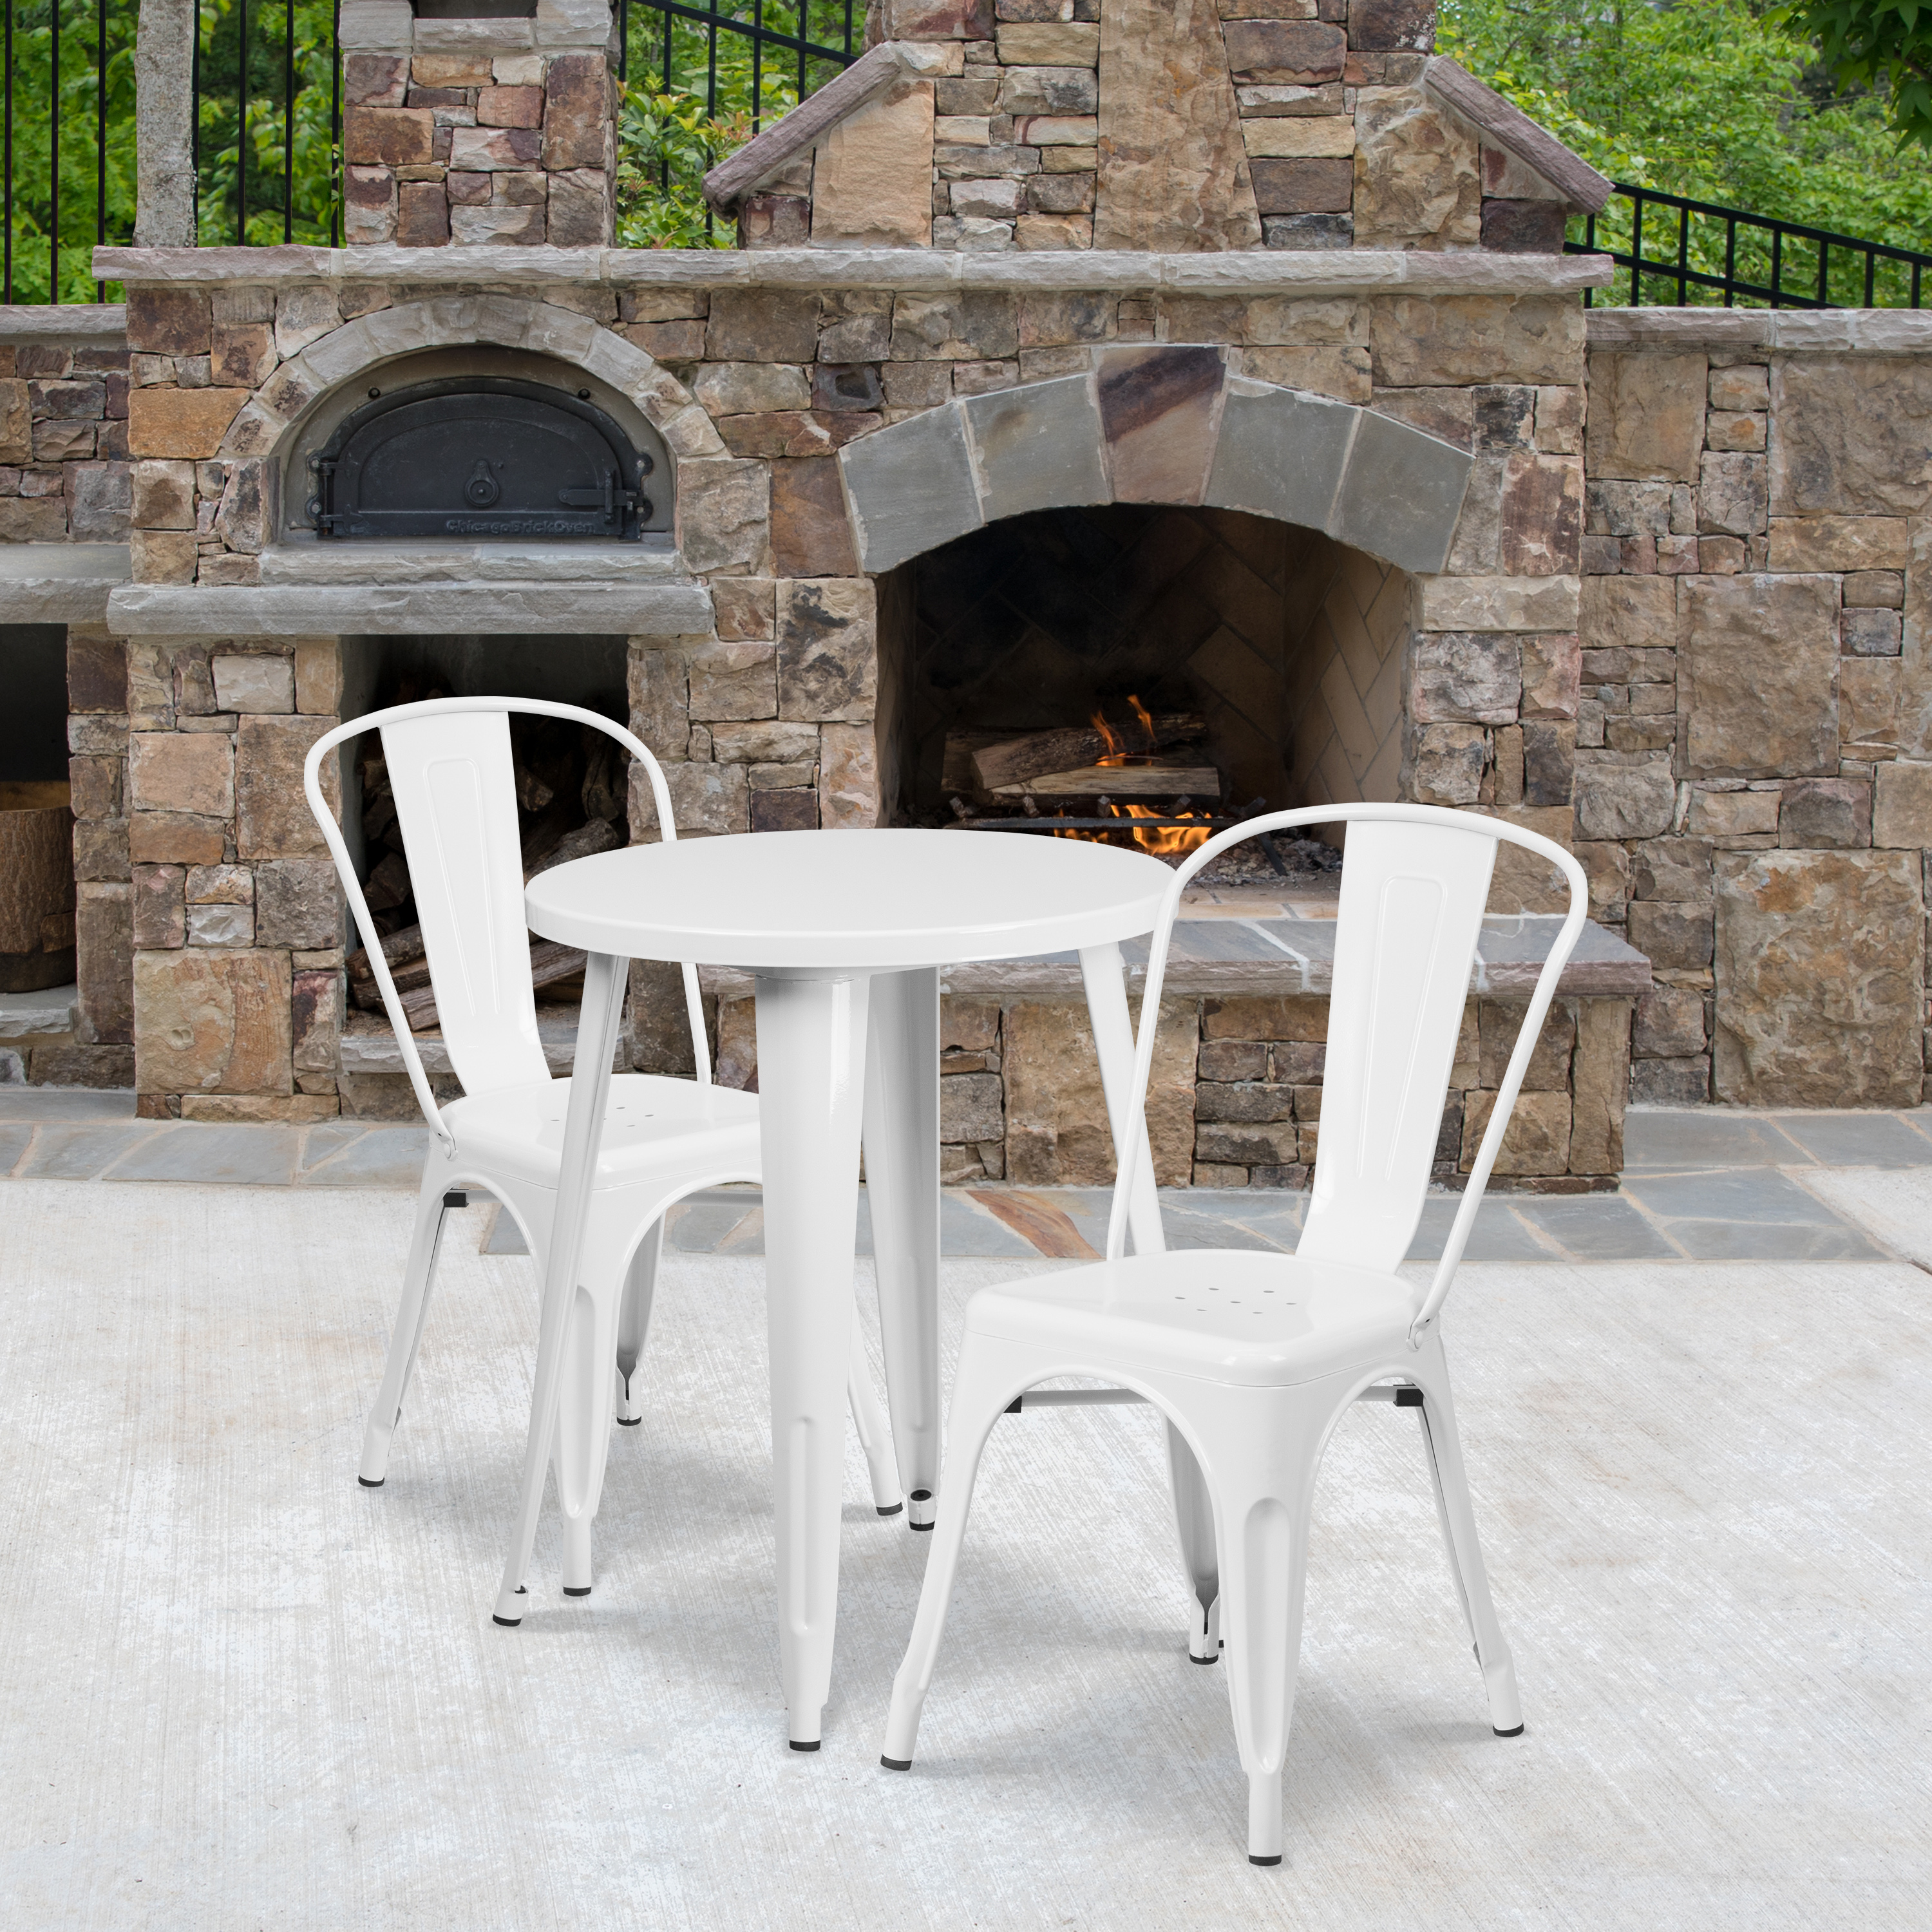 Flash Furniture Napoleon Commercial Grade 24" Round White Metal Indoor-Outdoor Table Set with 2 Cafe Chairs - image 2 of 5